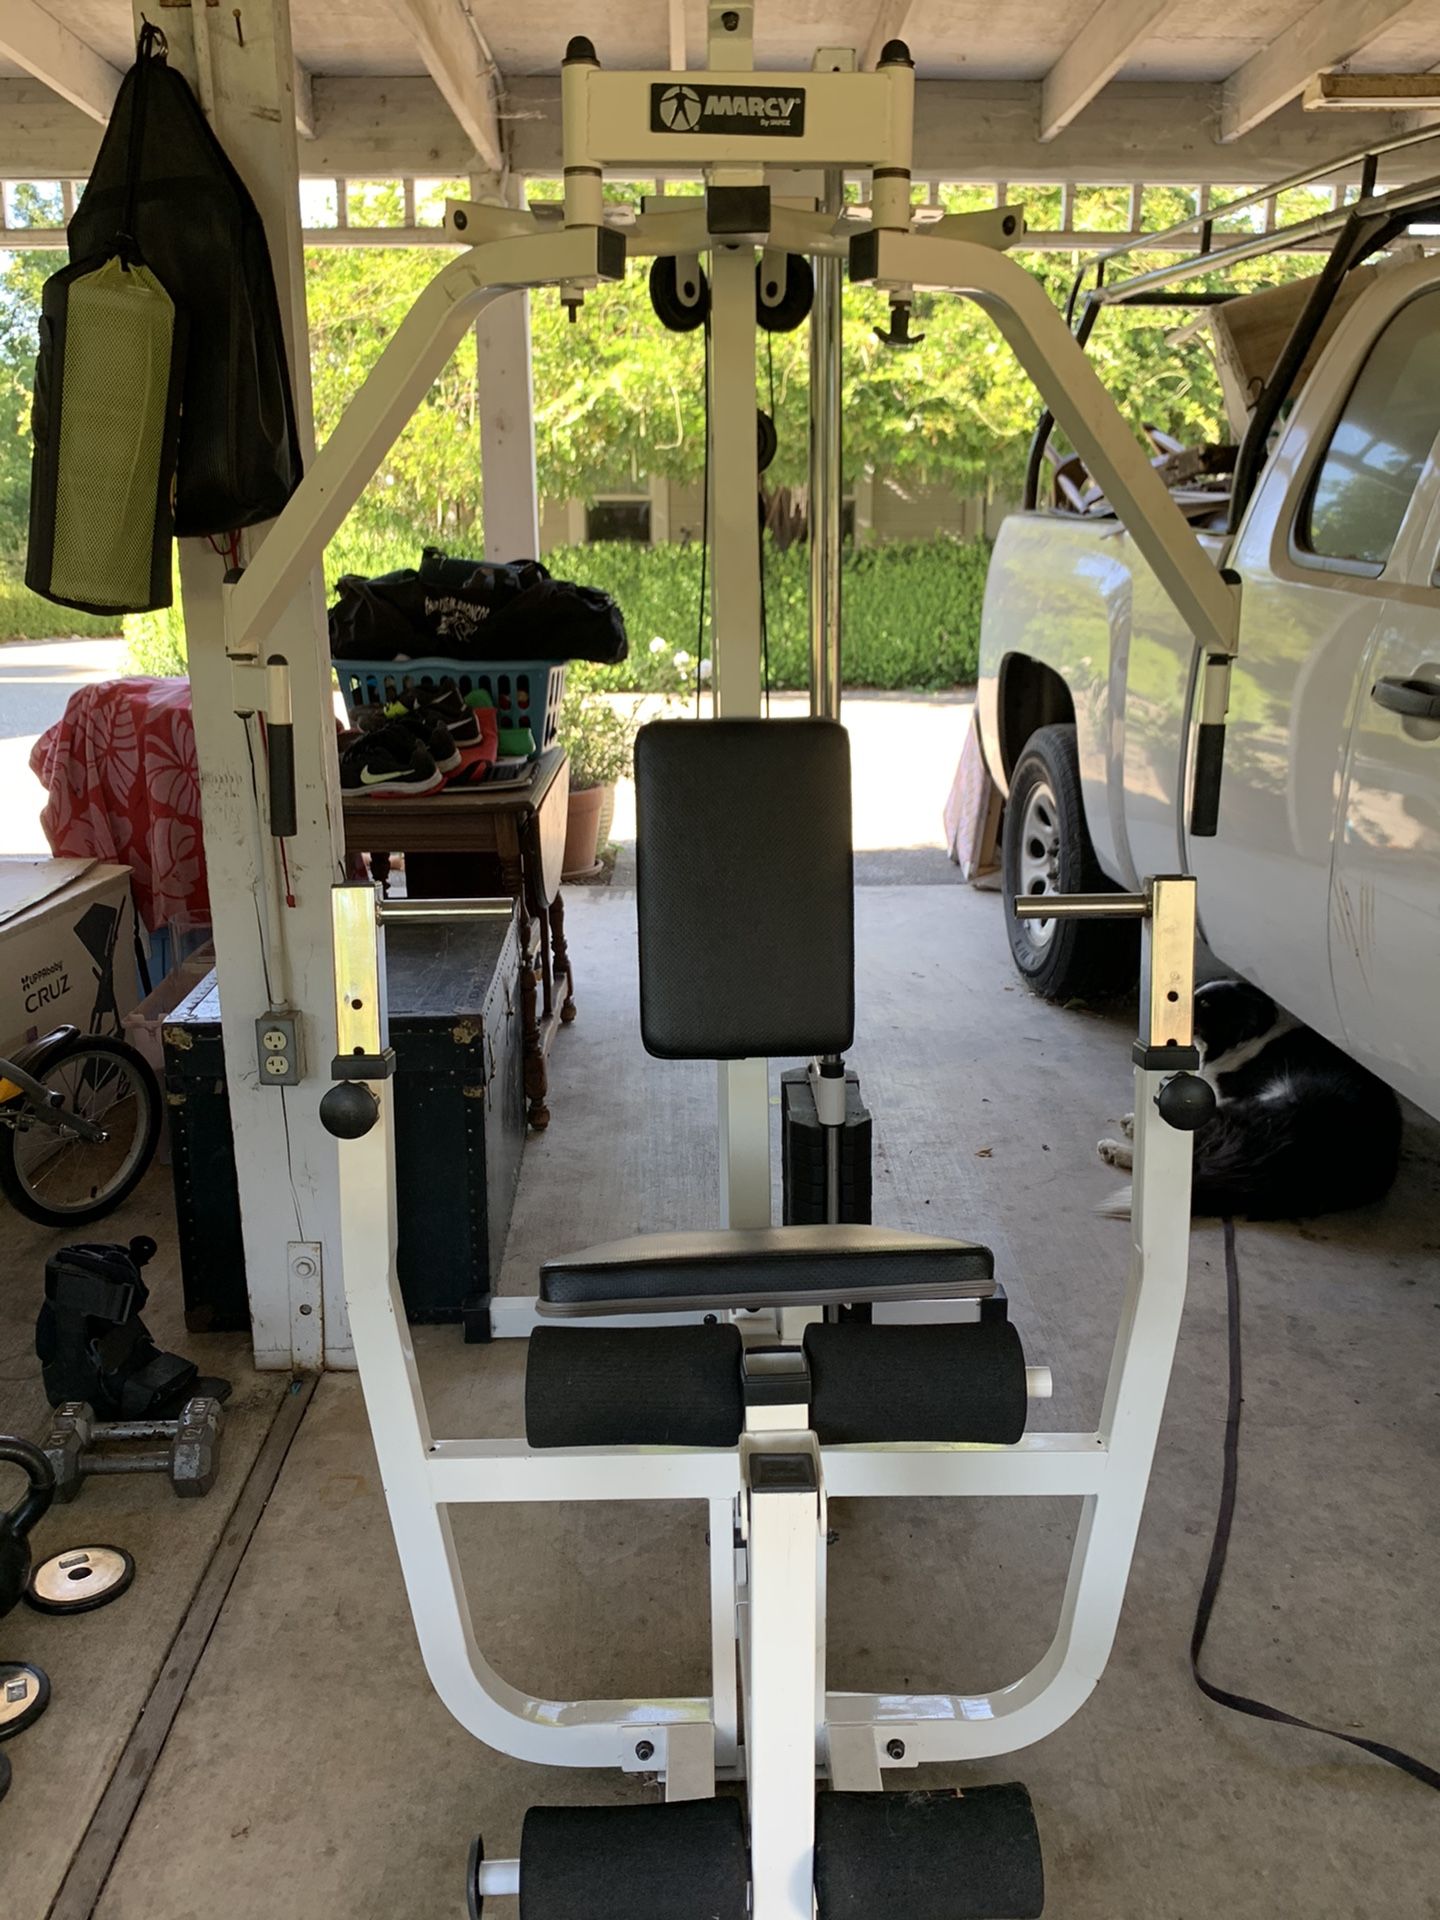 Marcy home gym